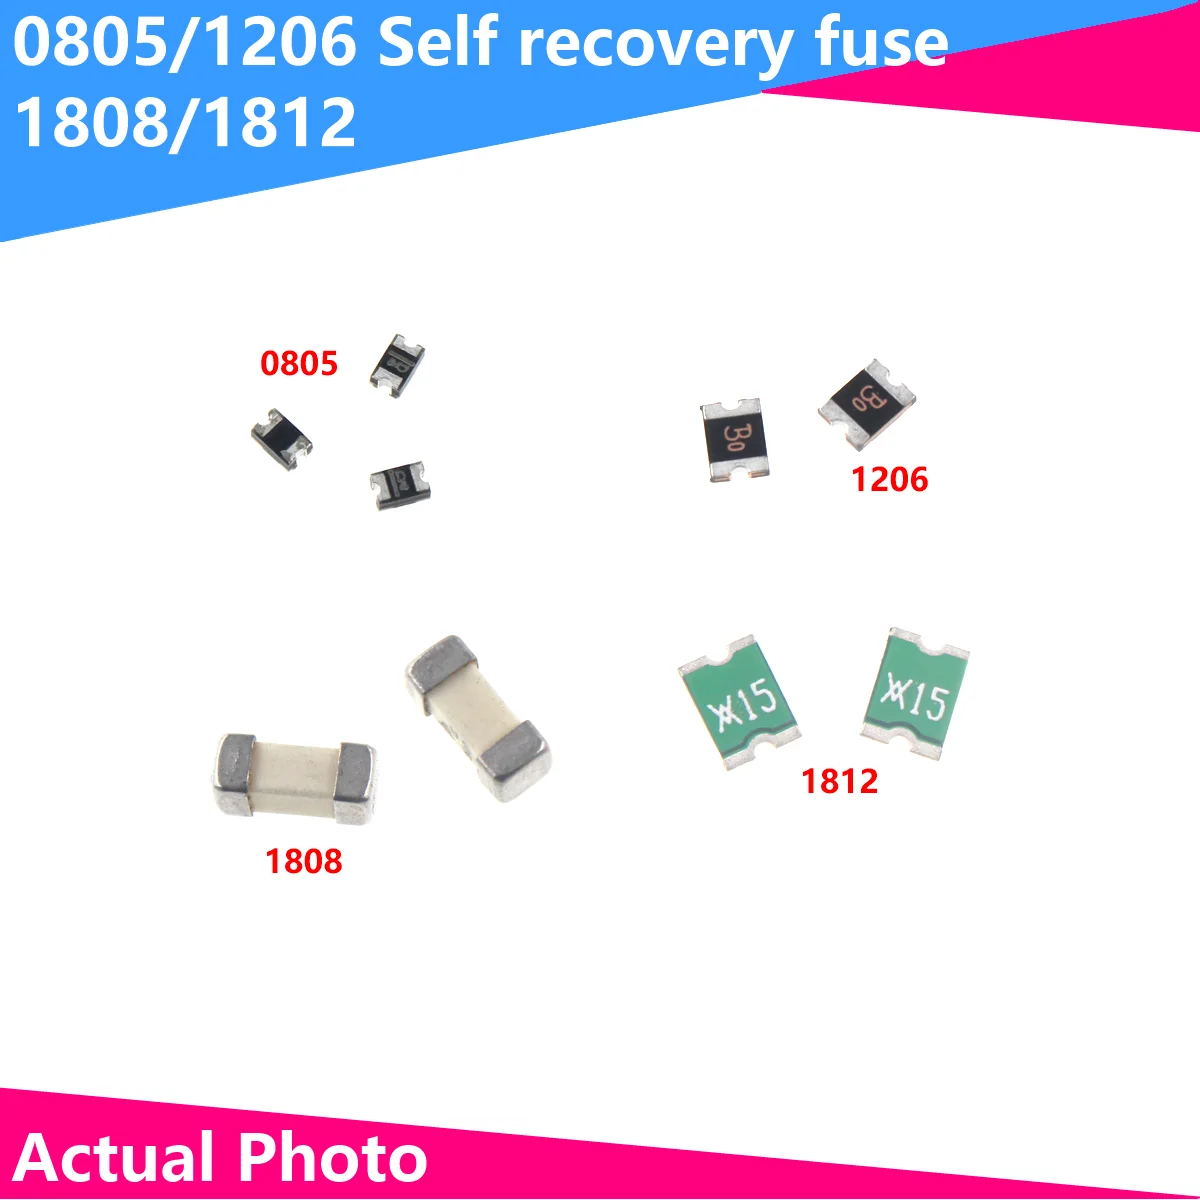 20PCS 0805 1206 1808 1812 0.1A 0.2A 0.3A 0.5A 0.75A 1A 1.1A 2A 3A SMD Resettable Fuse Self-Recovery Fuse PPTC 20pcs lot 2920 3 3a 24v patch self recovery fuse pptc marking 3324